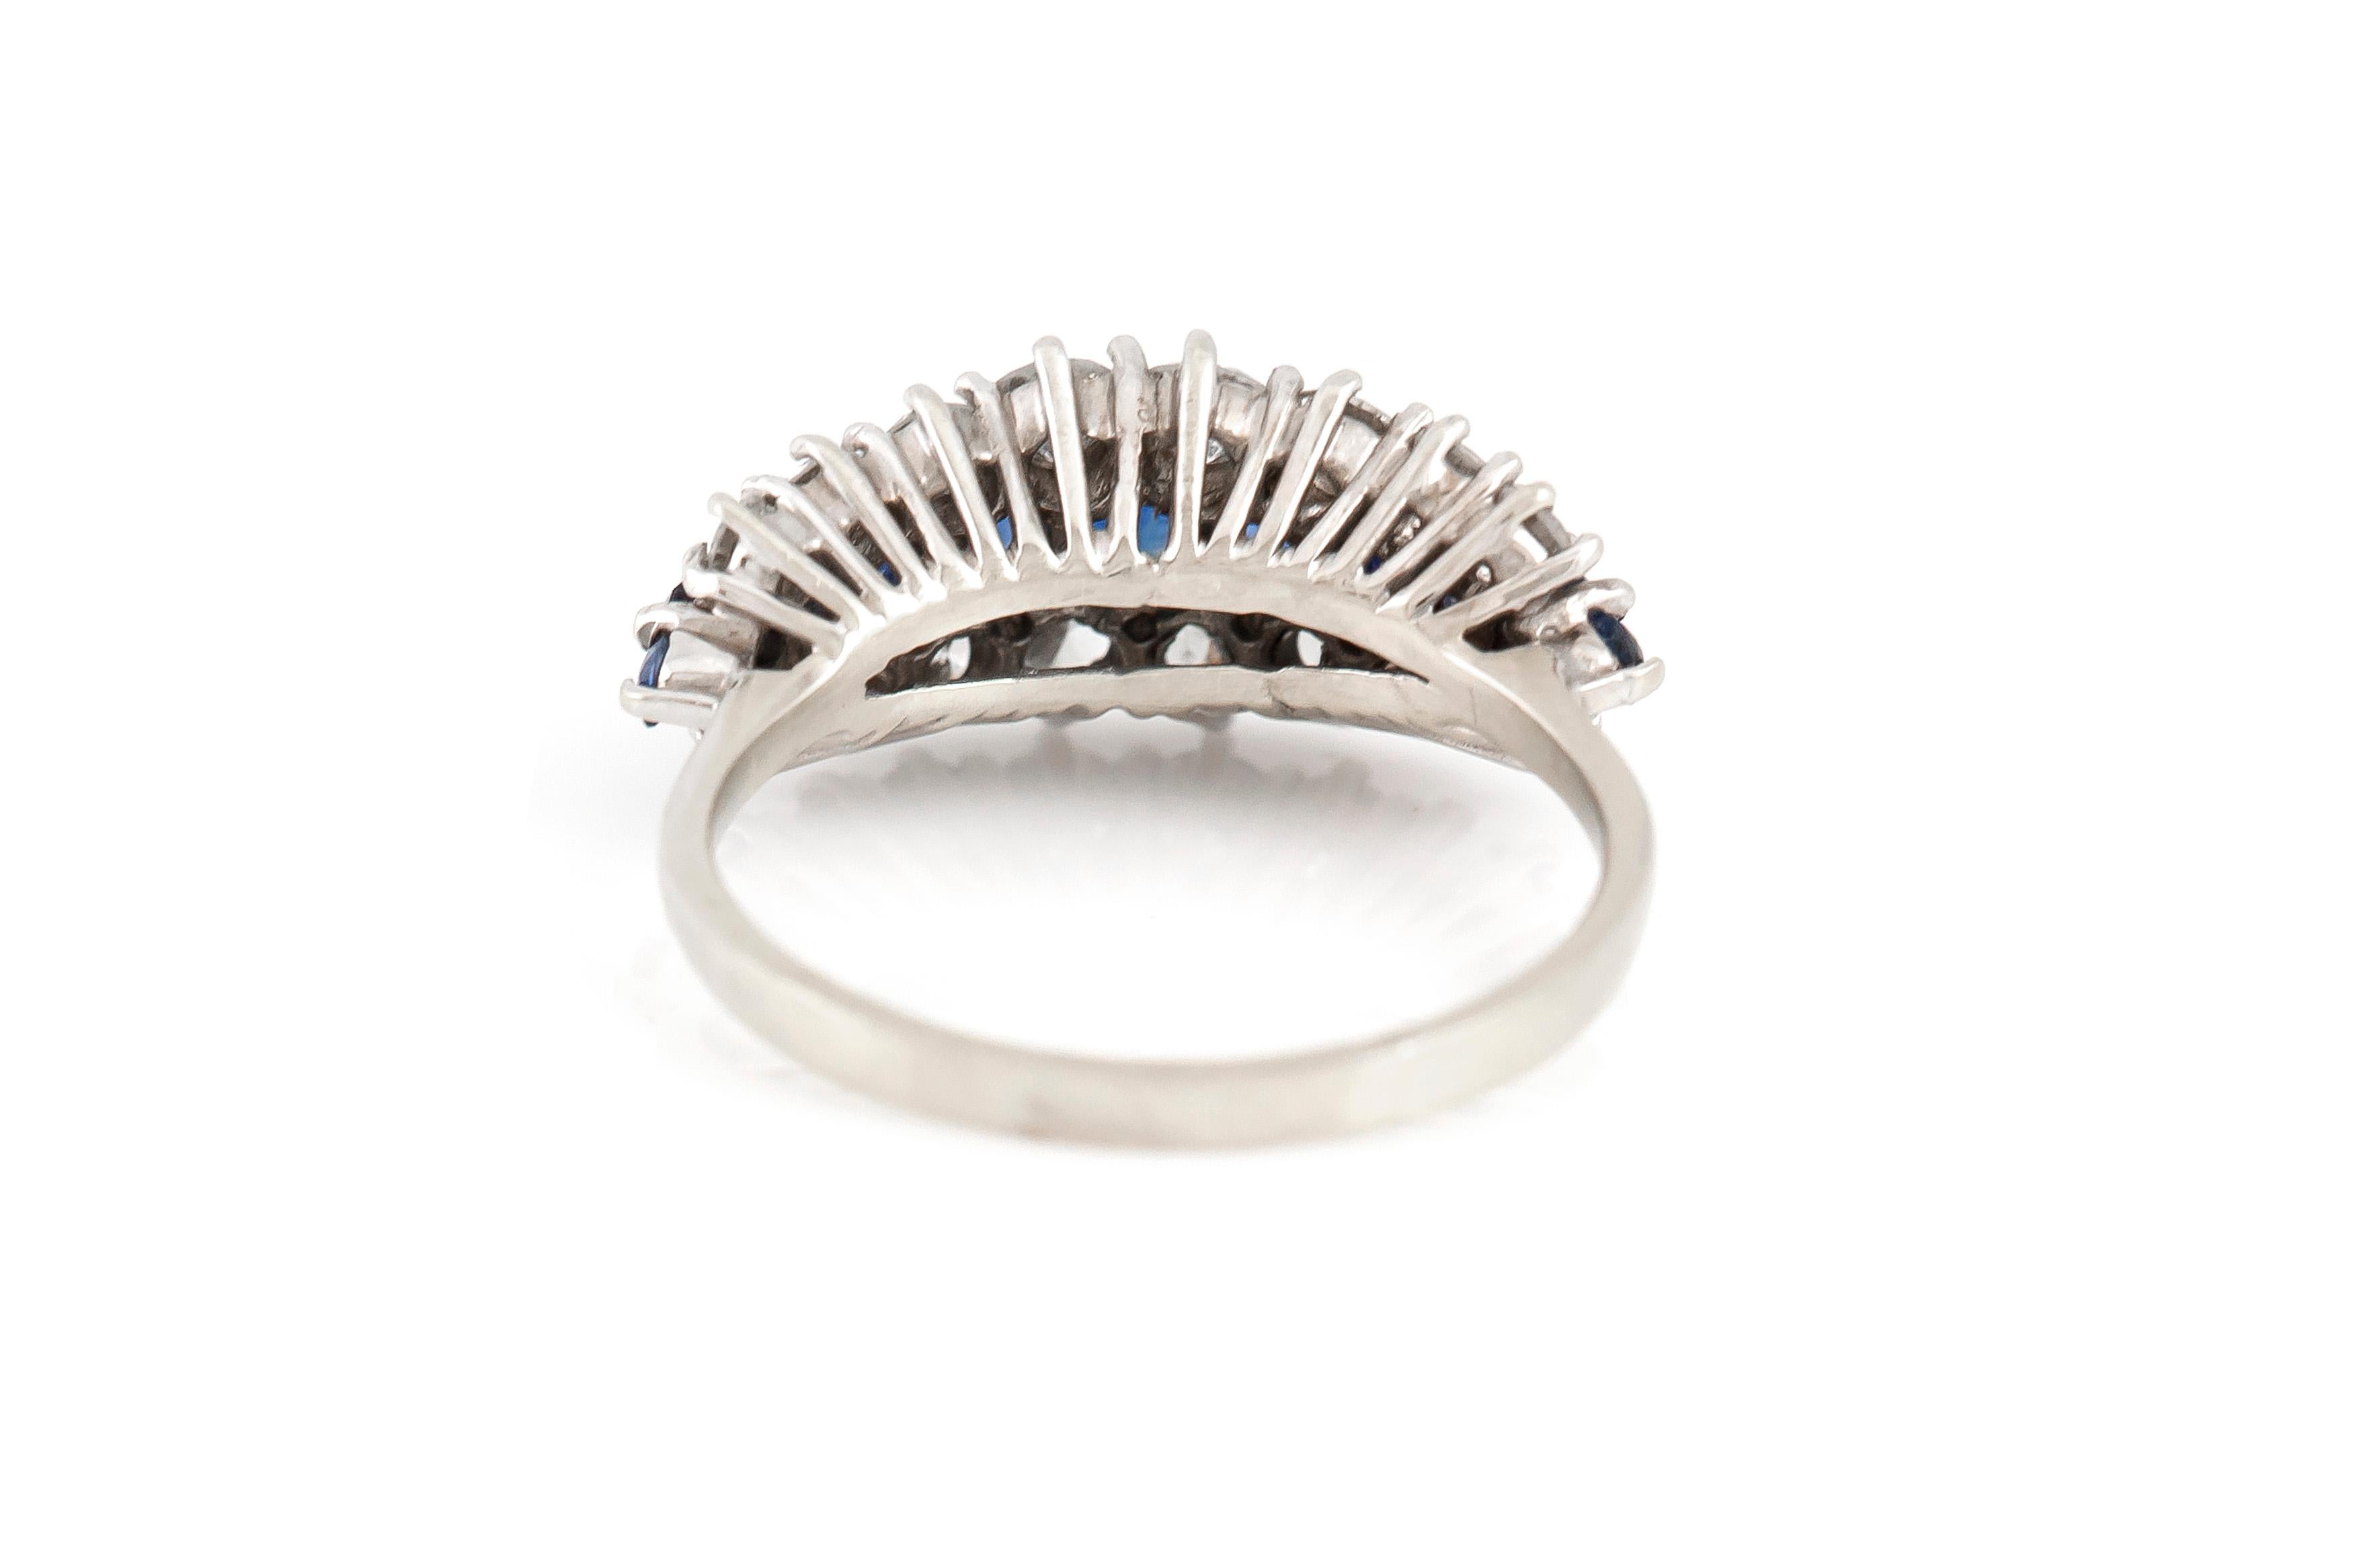 The ring is finely crafted in 18k white gold with sapphires weighing approximately total of 1.50 carat and diamonds weighing approximately total of 1.40 carat.